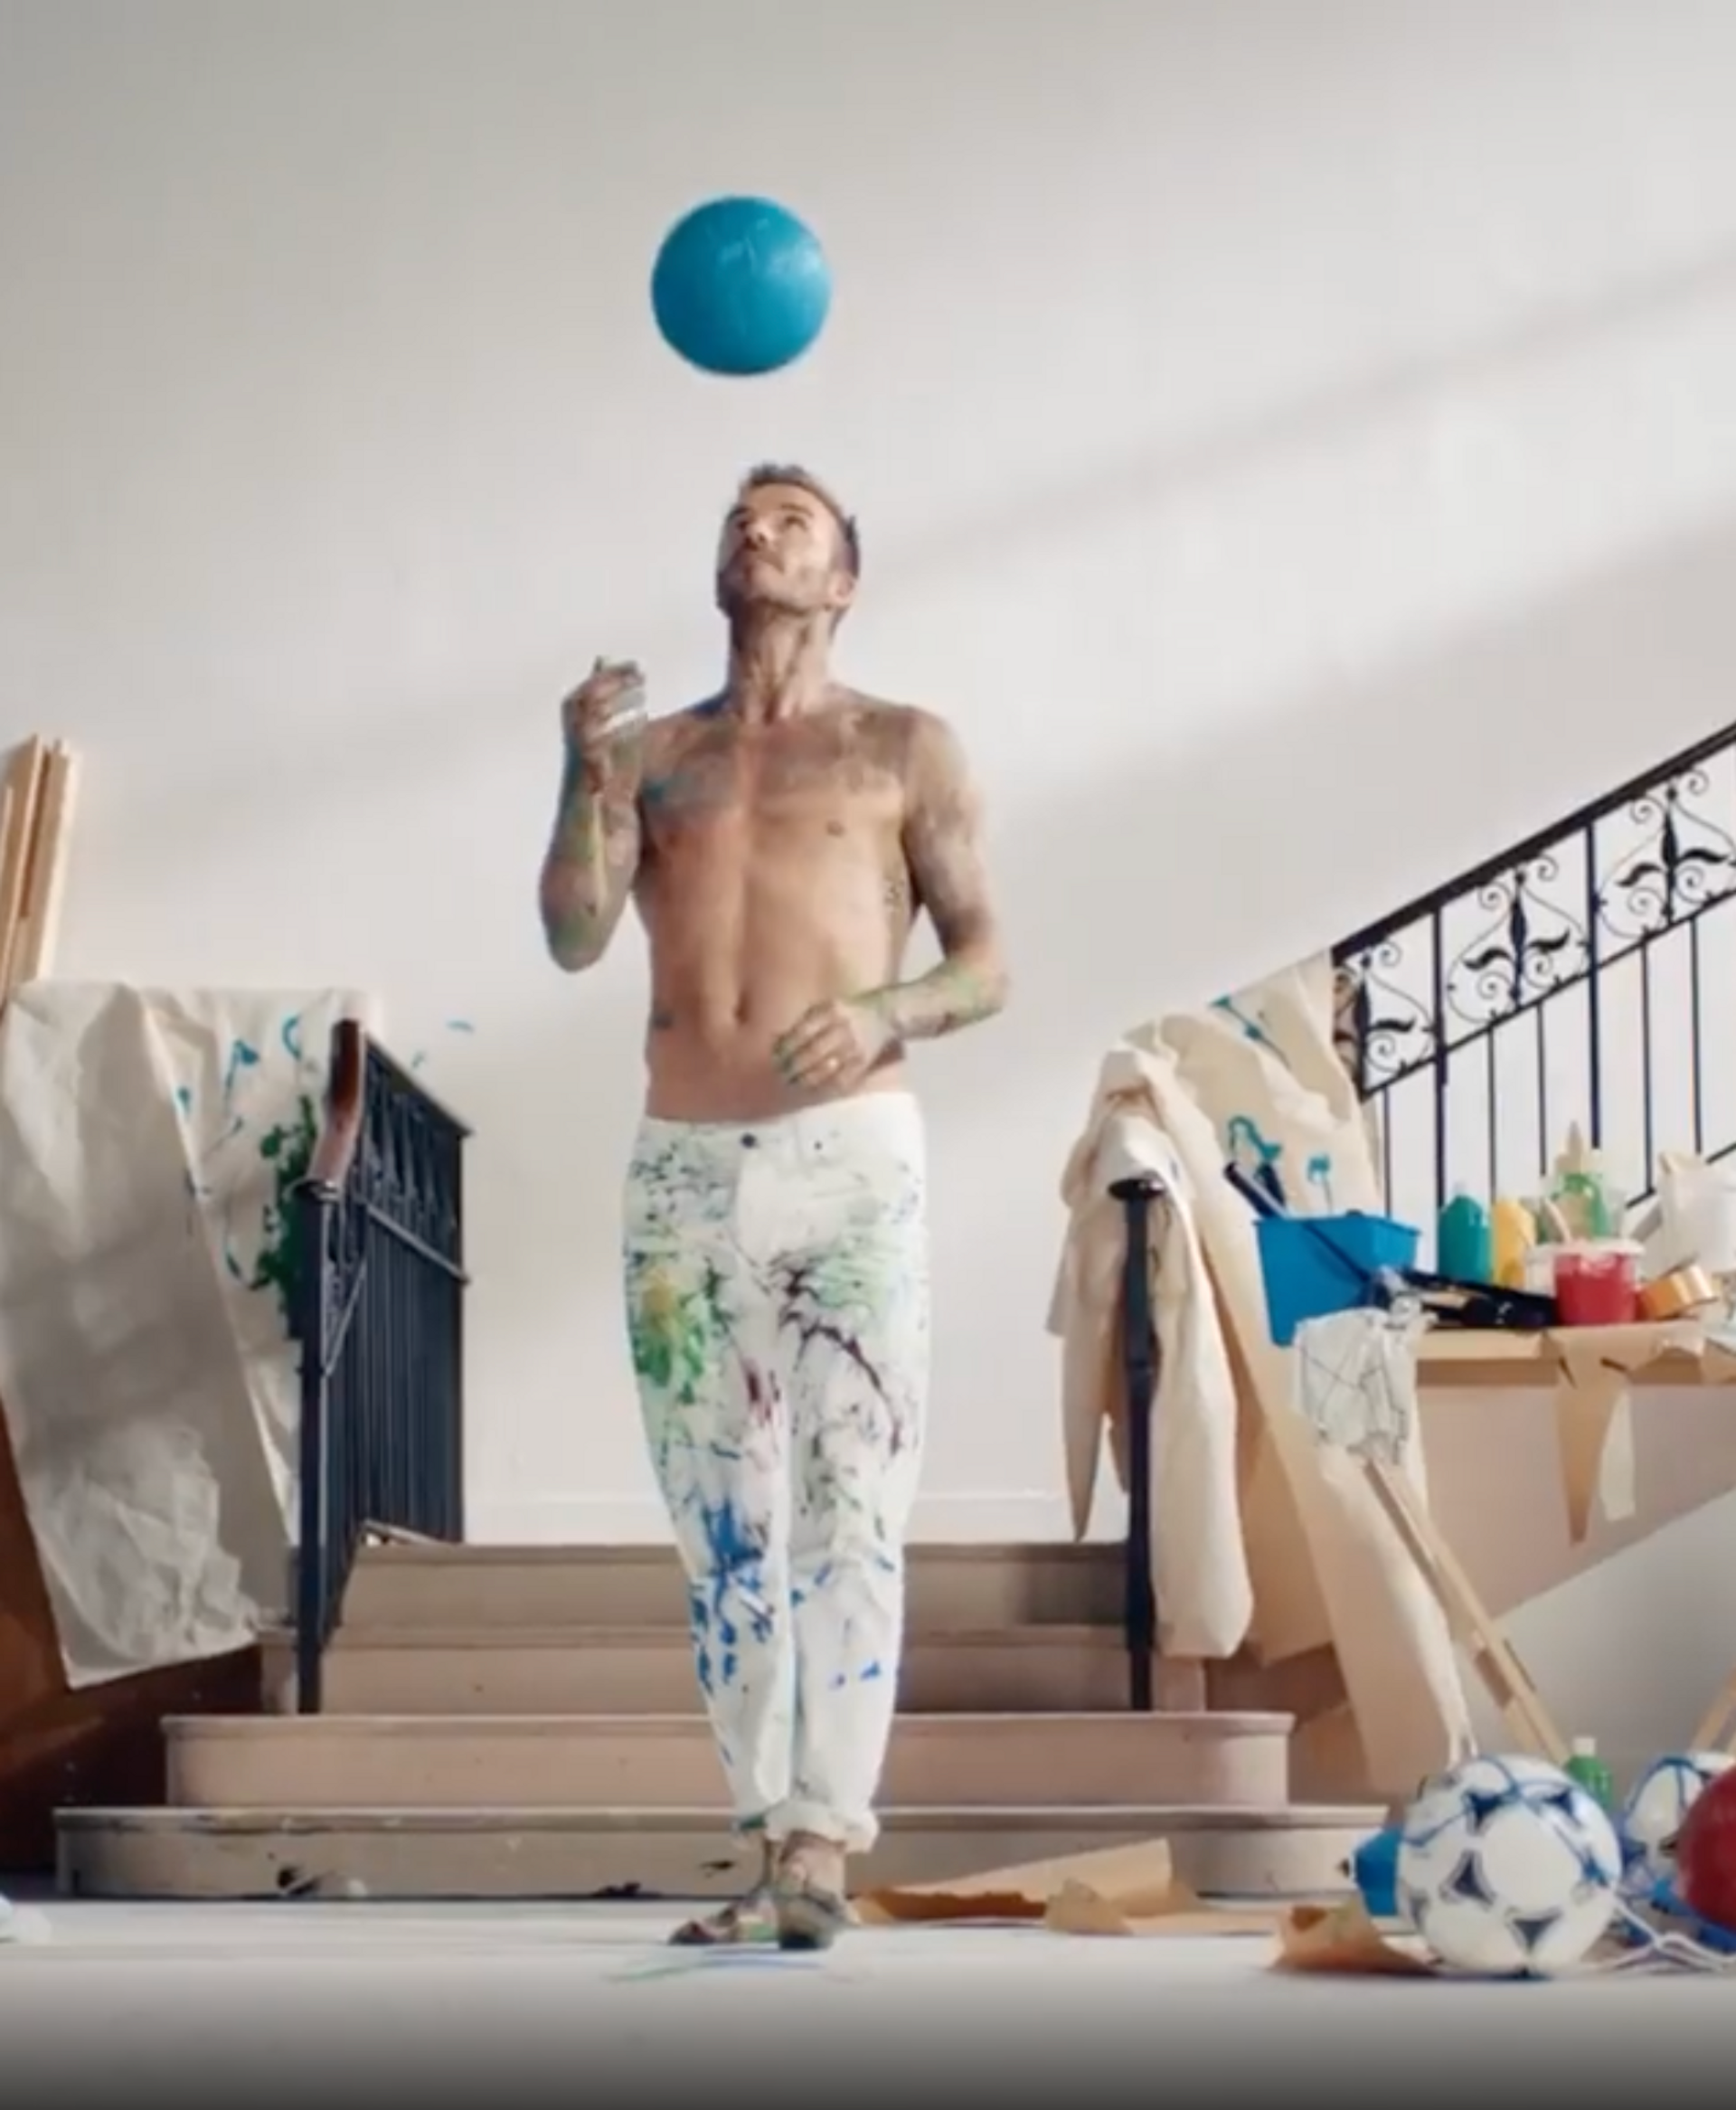 The great artist at work: David Beckham creates Christmas-themed art using only his balls